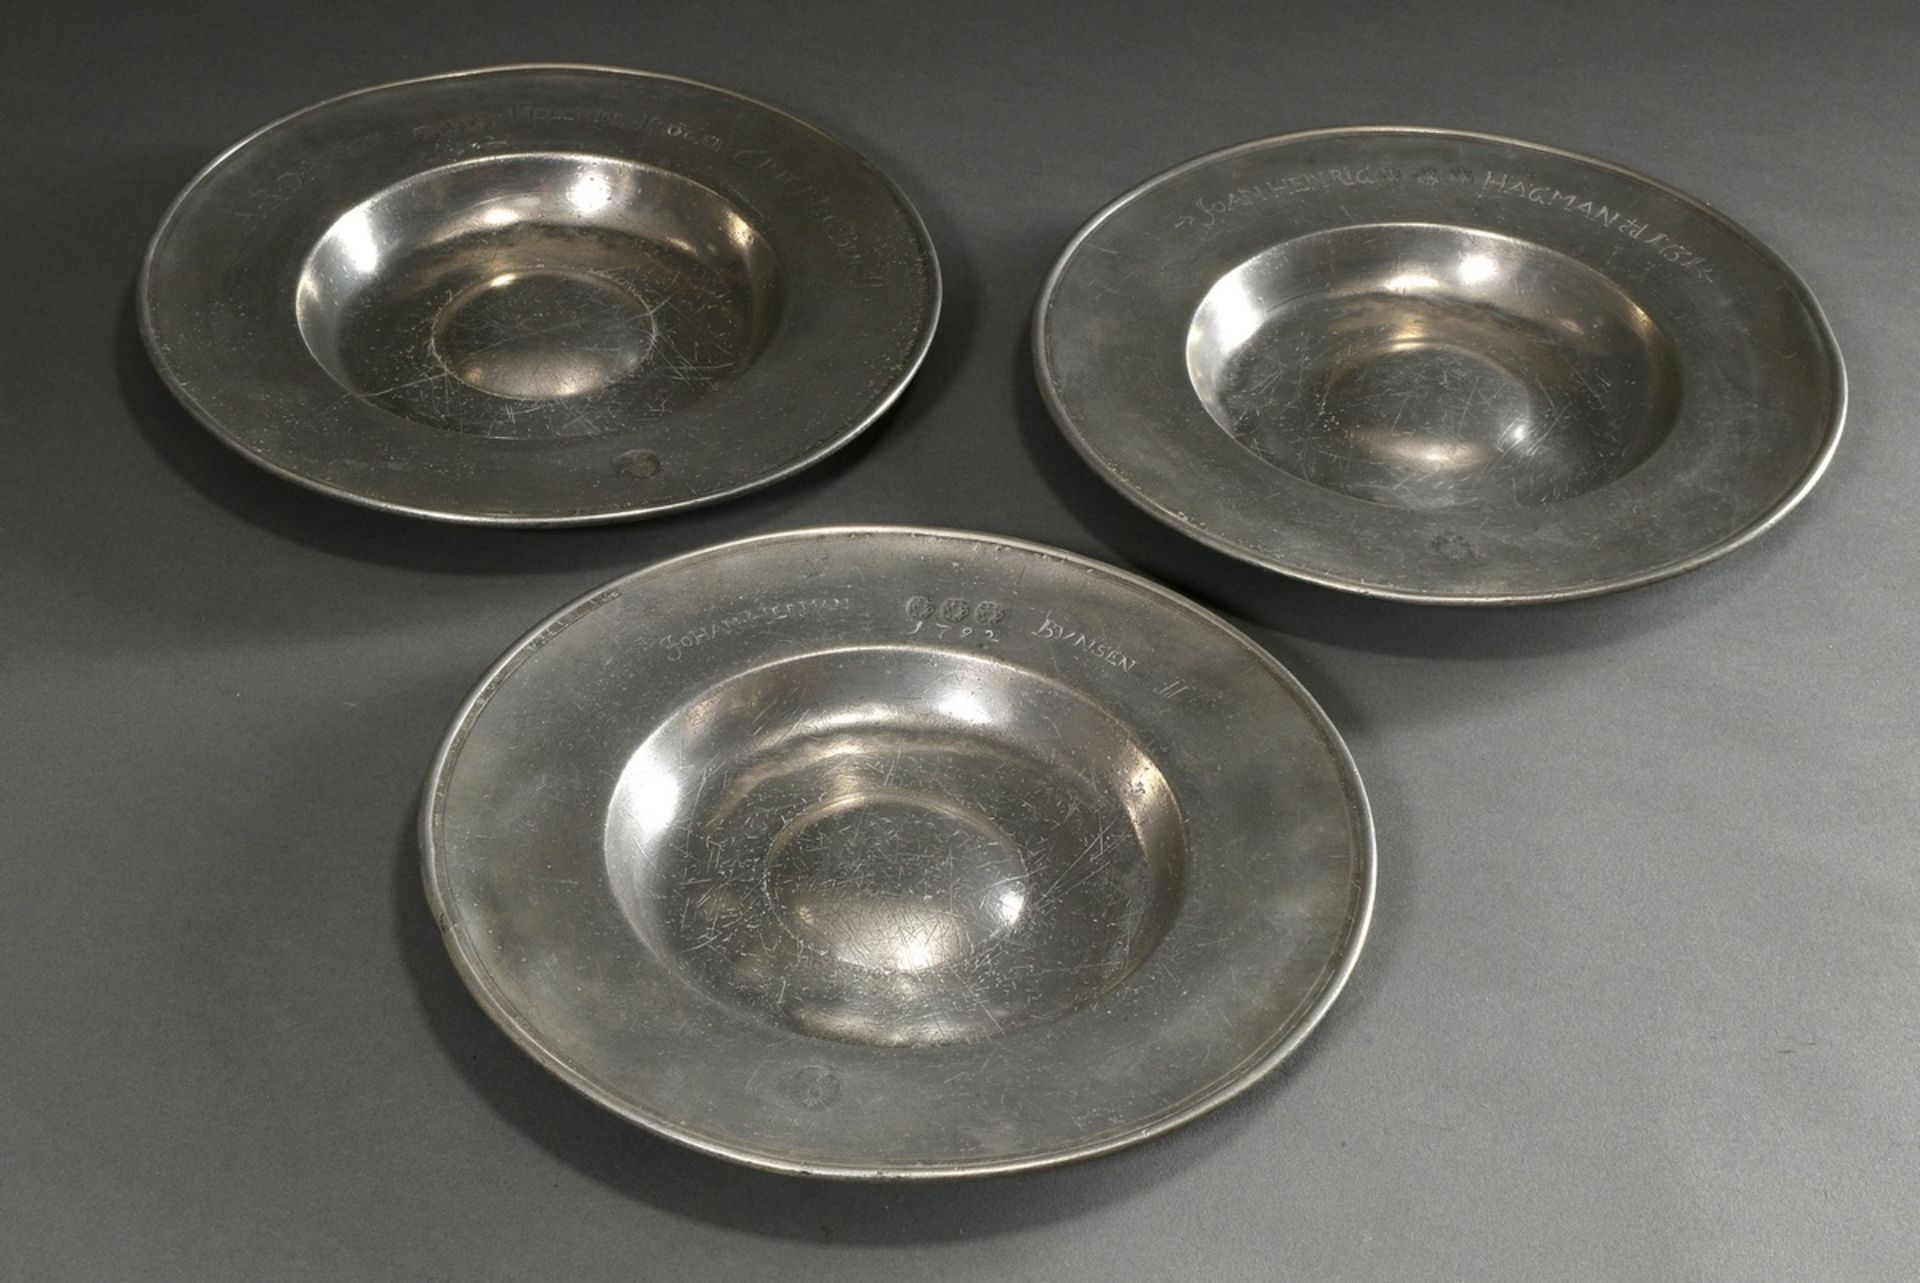 3 pewter wide rim plates with a humped centre, each dated and marked on the rim "A.R.D. Anthon Melc - Image 2 of 8